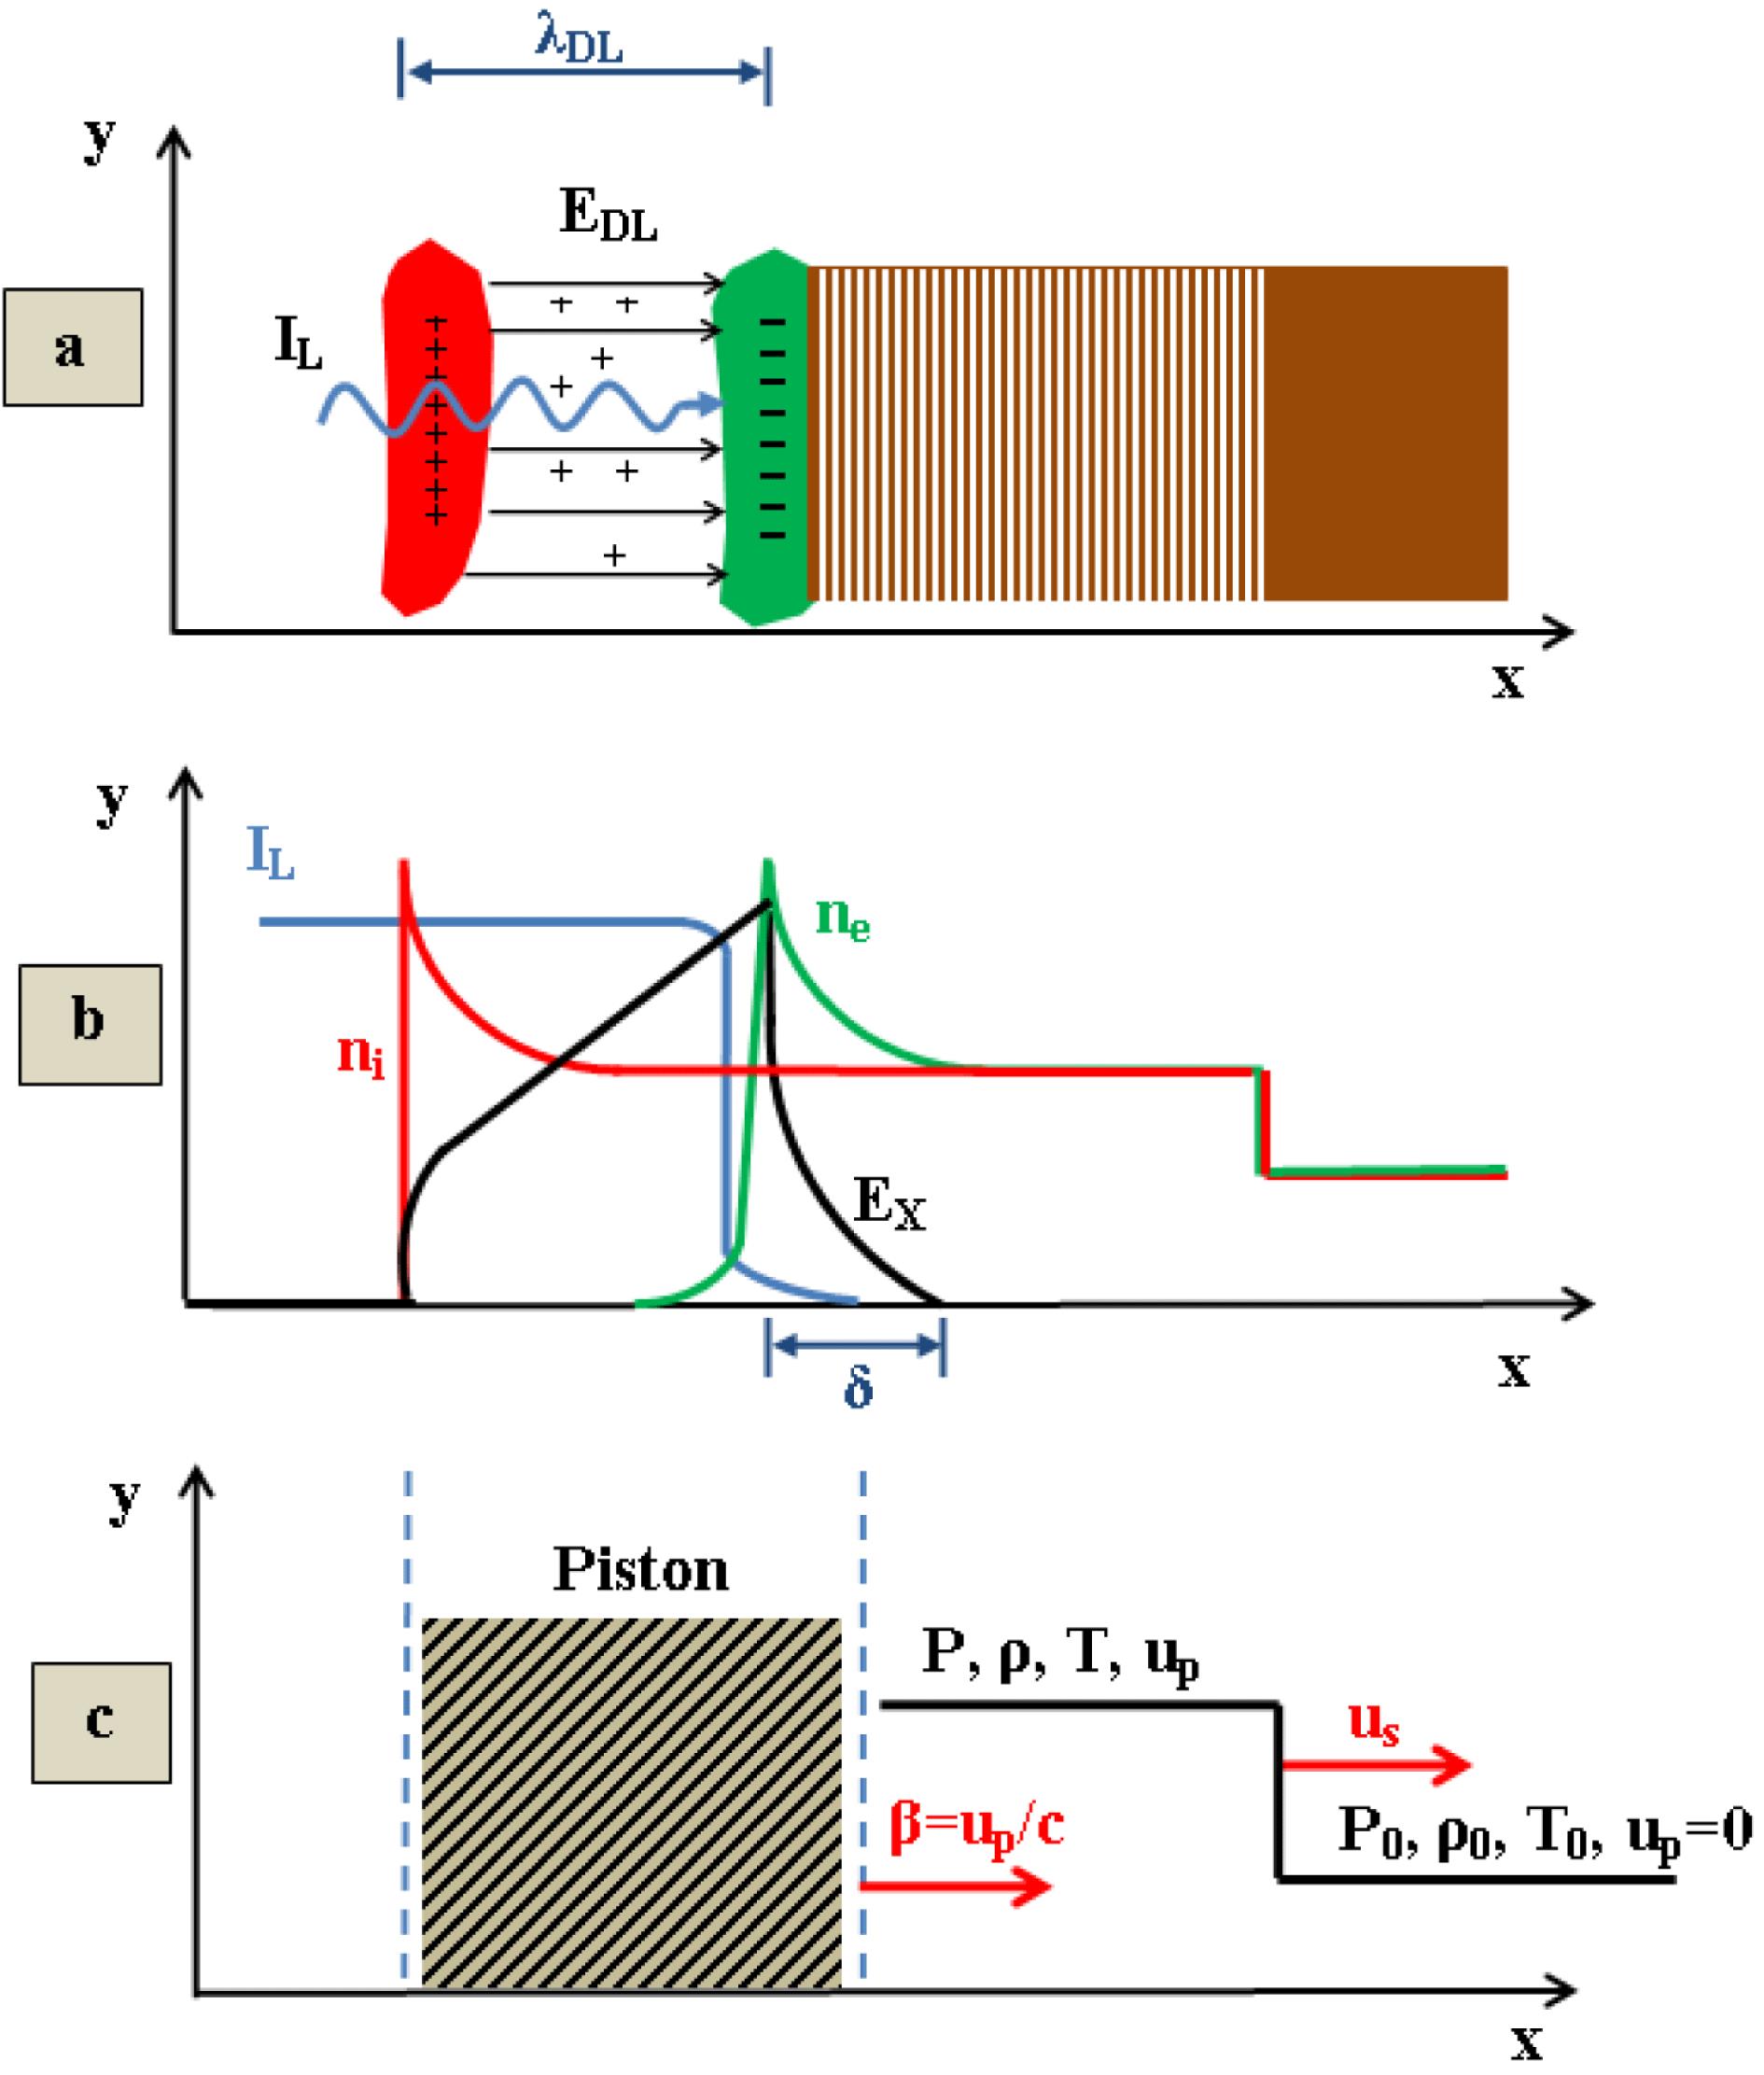 (a) Displays the capacitor model where the ponderomotive force dominates the interaction; (b) shows the DL of the negative and positive charges. (c) The shock wave description in the laboratory frame of reference.